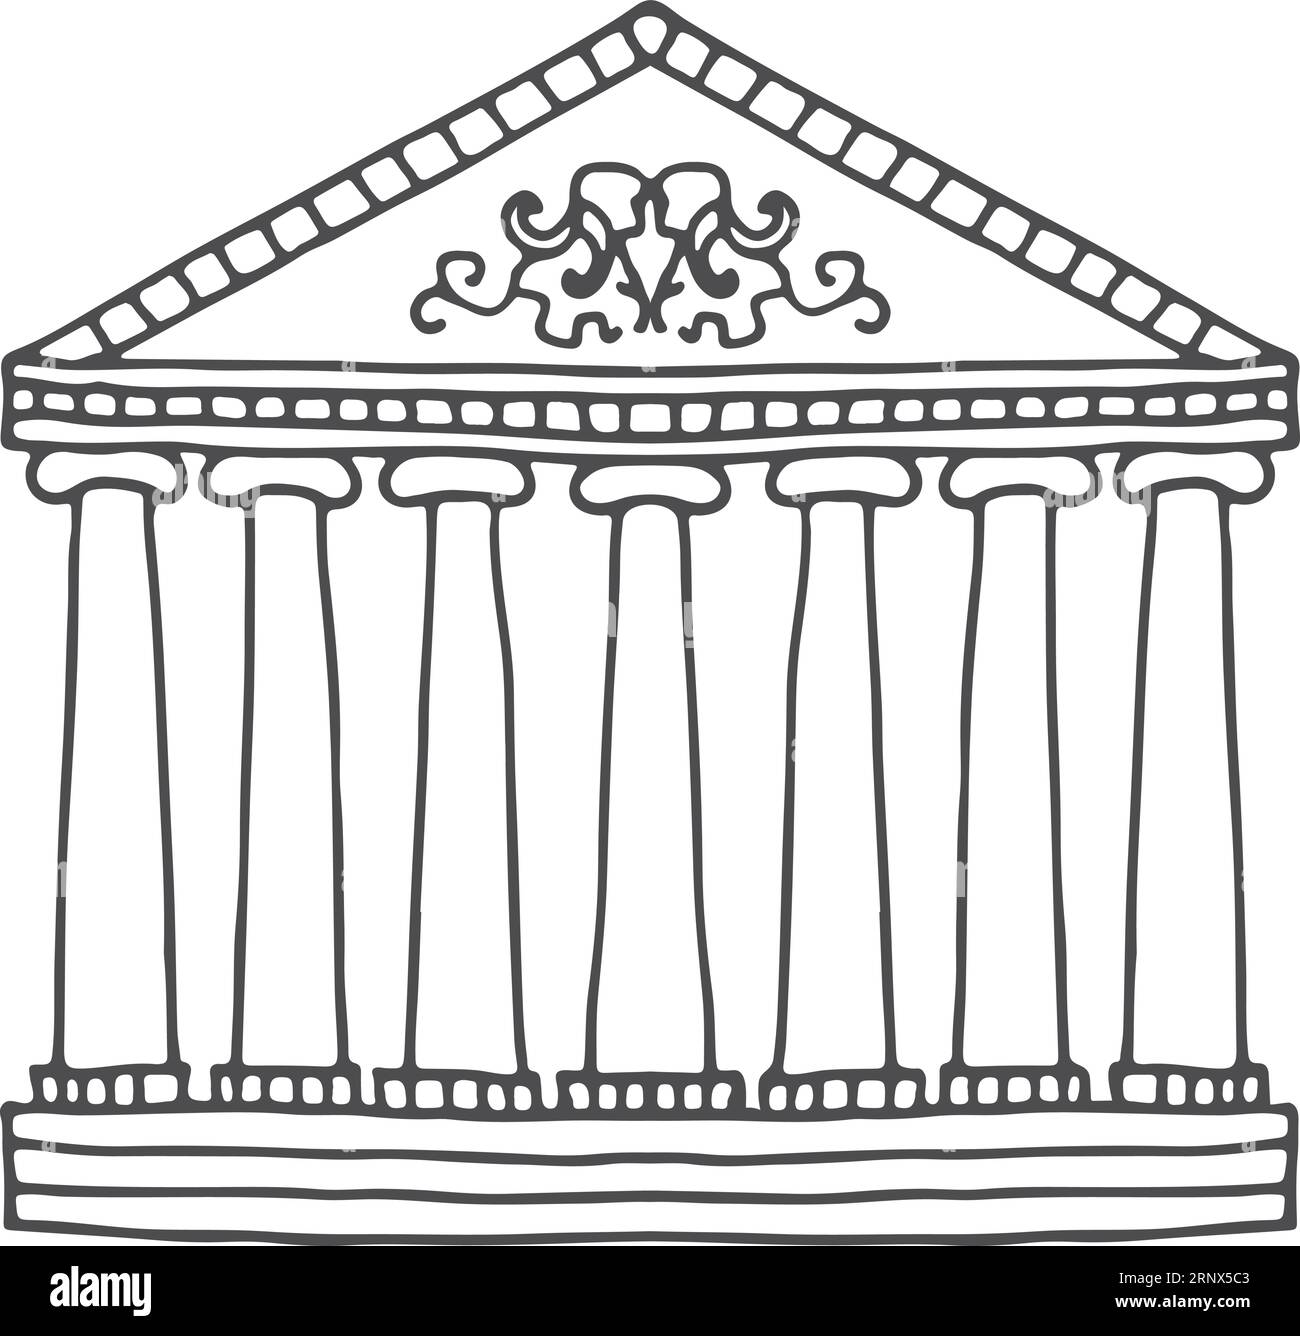 Classic architecture building with columns. Hand drawn doodle Stock Vector